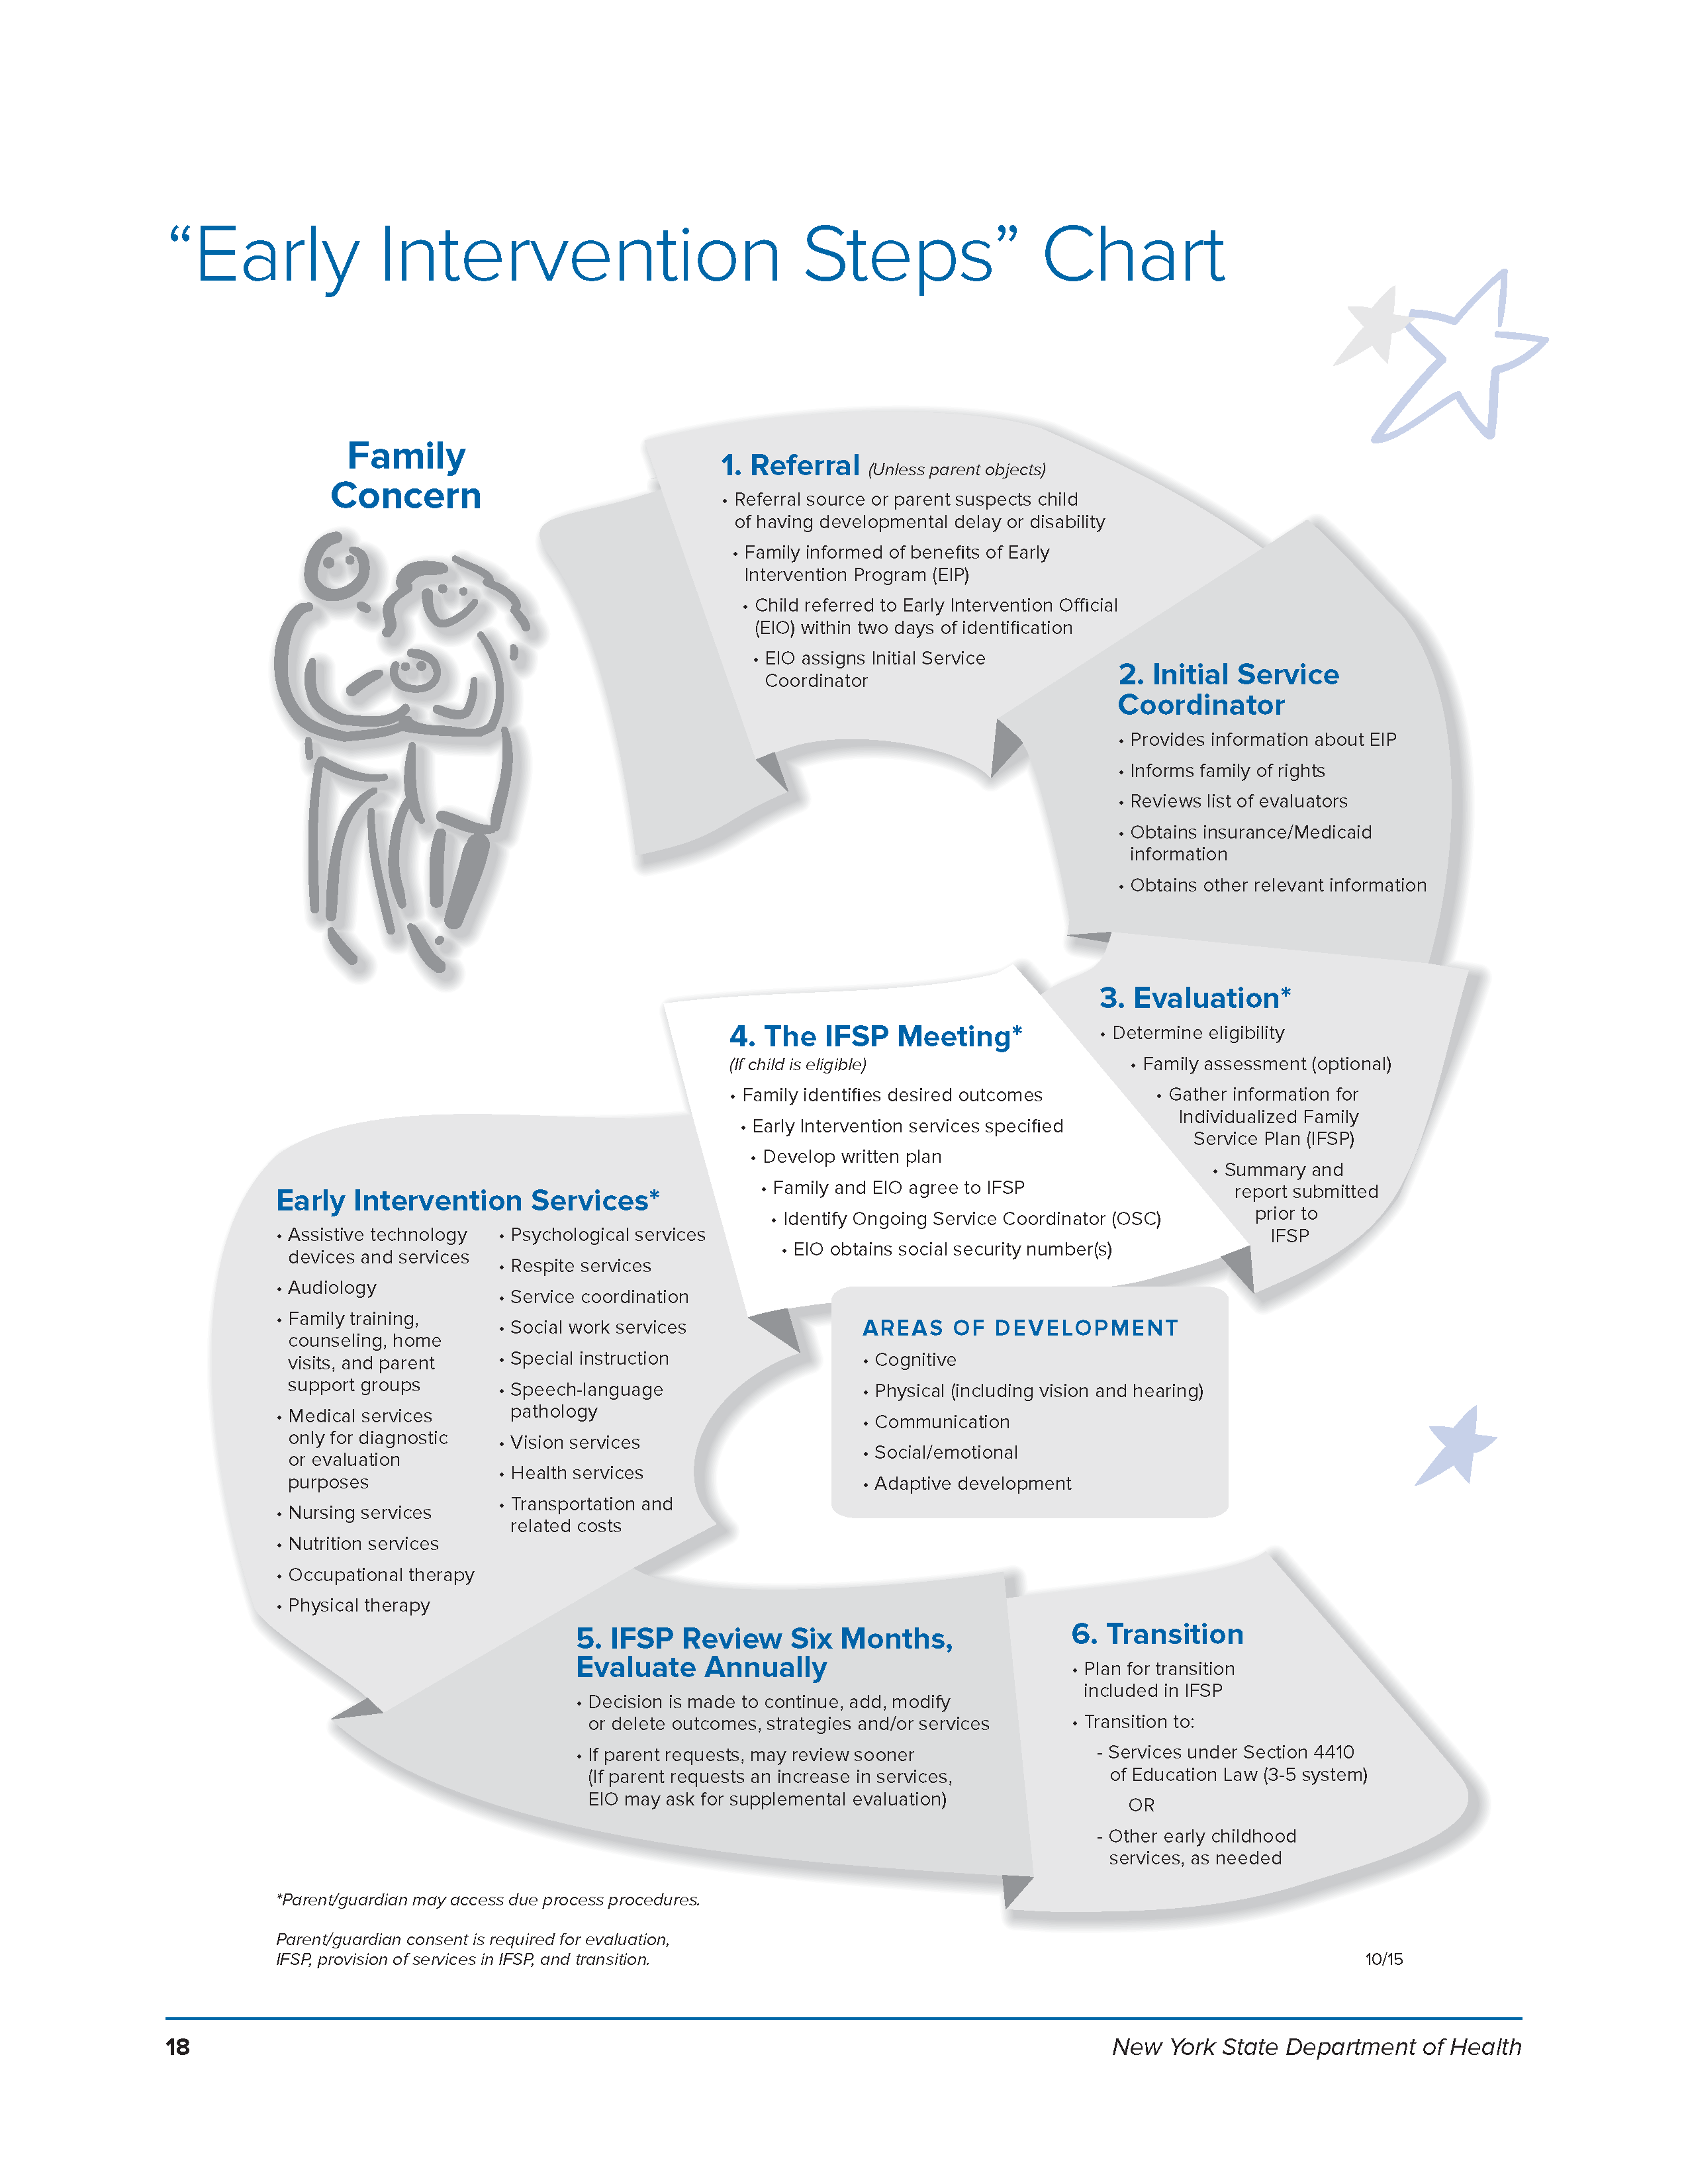 A process chart depicting the Early Intervention Steps.